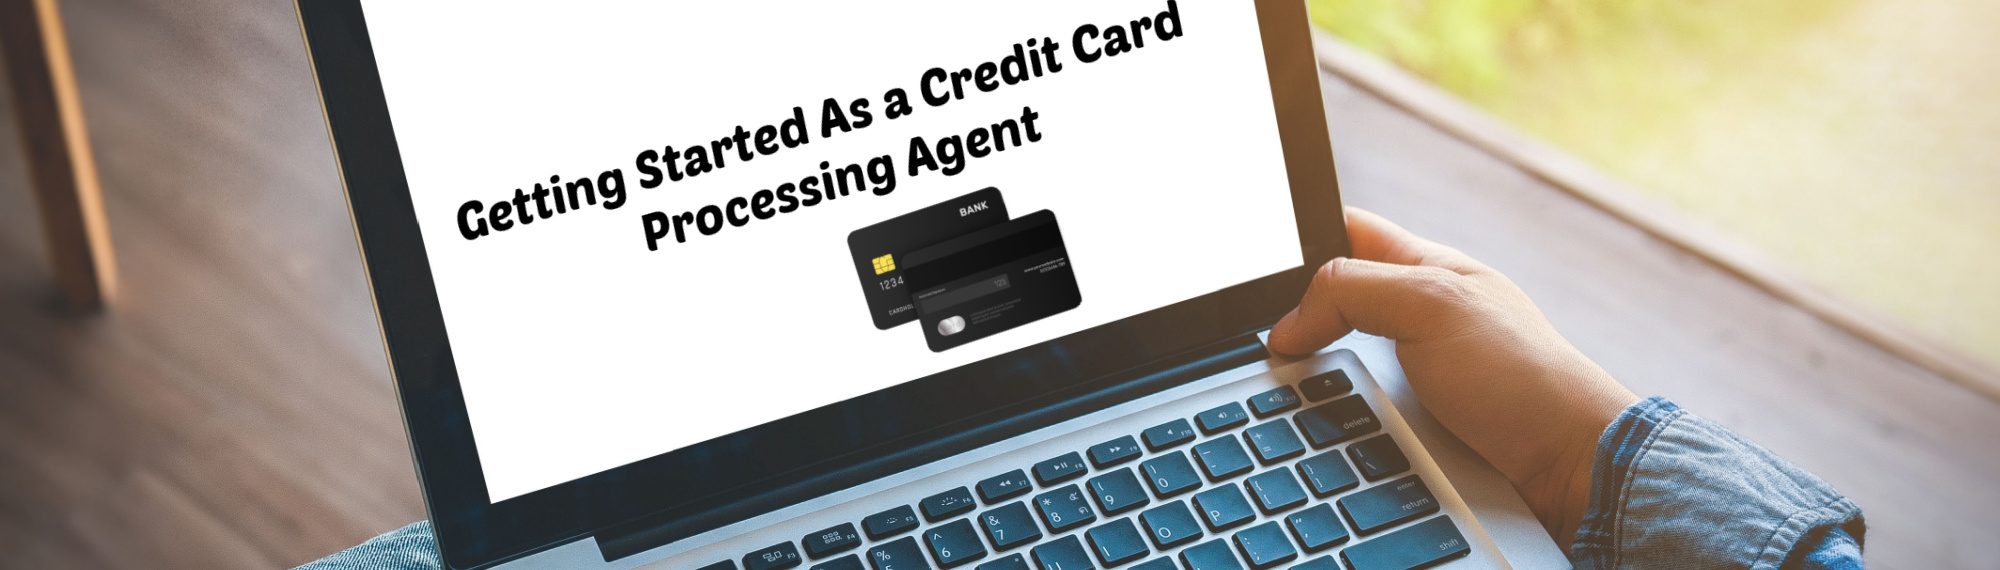 image of getting started as a credit card processing agent